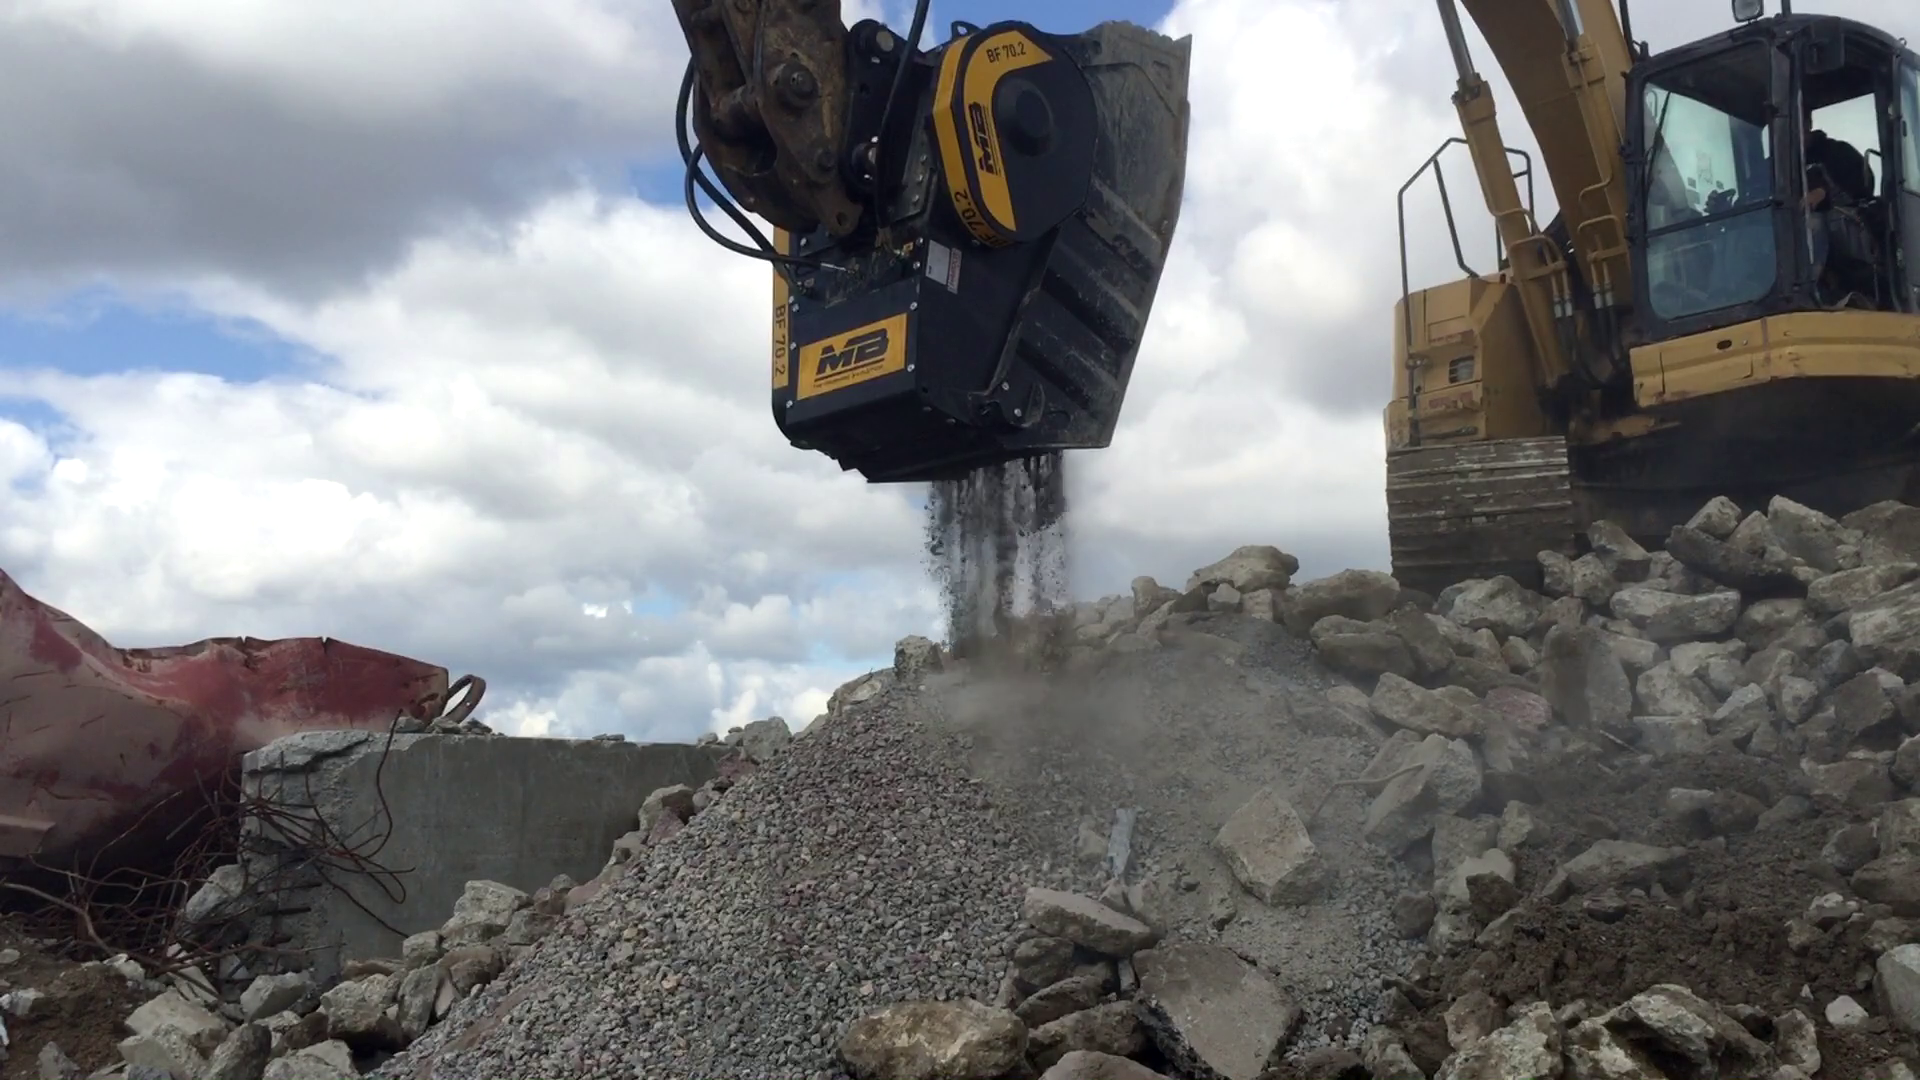 The BF70.2 crusher bucket is processing reinforced concrete to be sold to customers